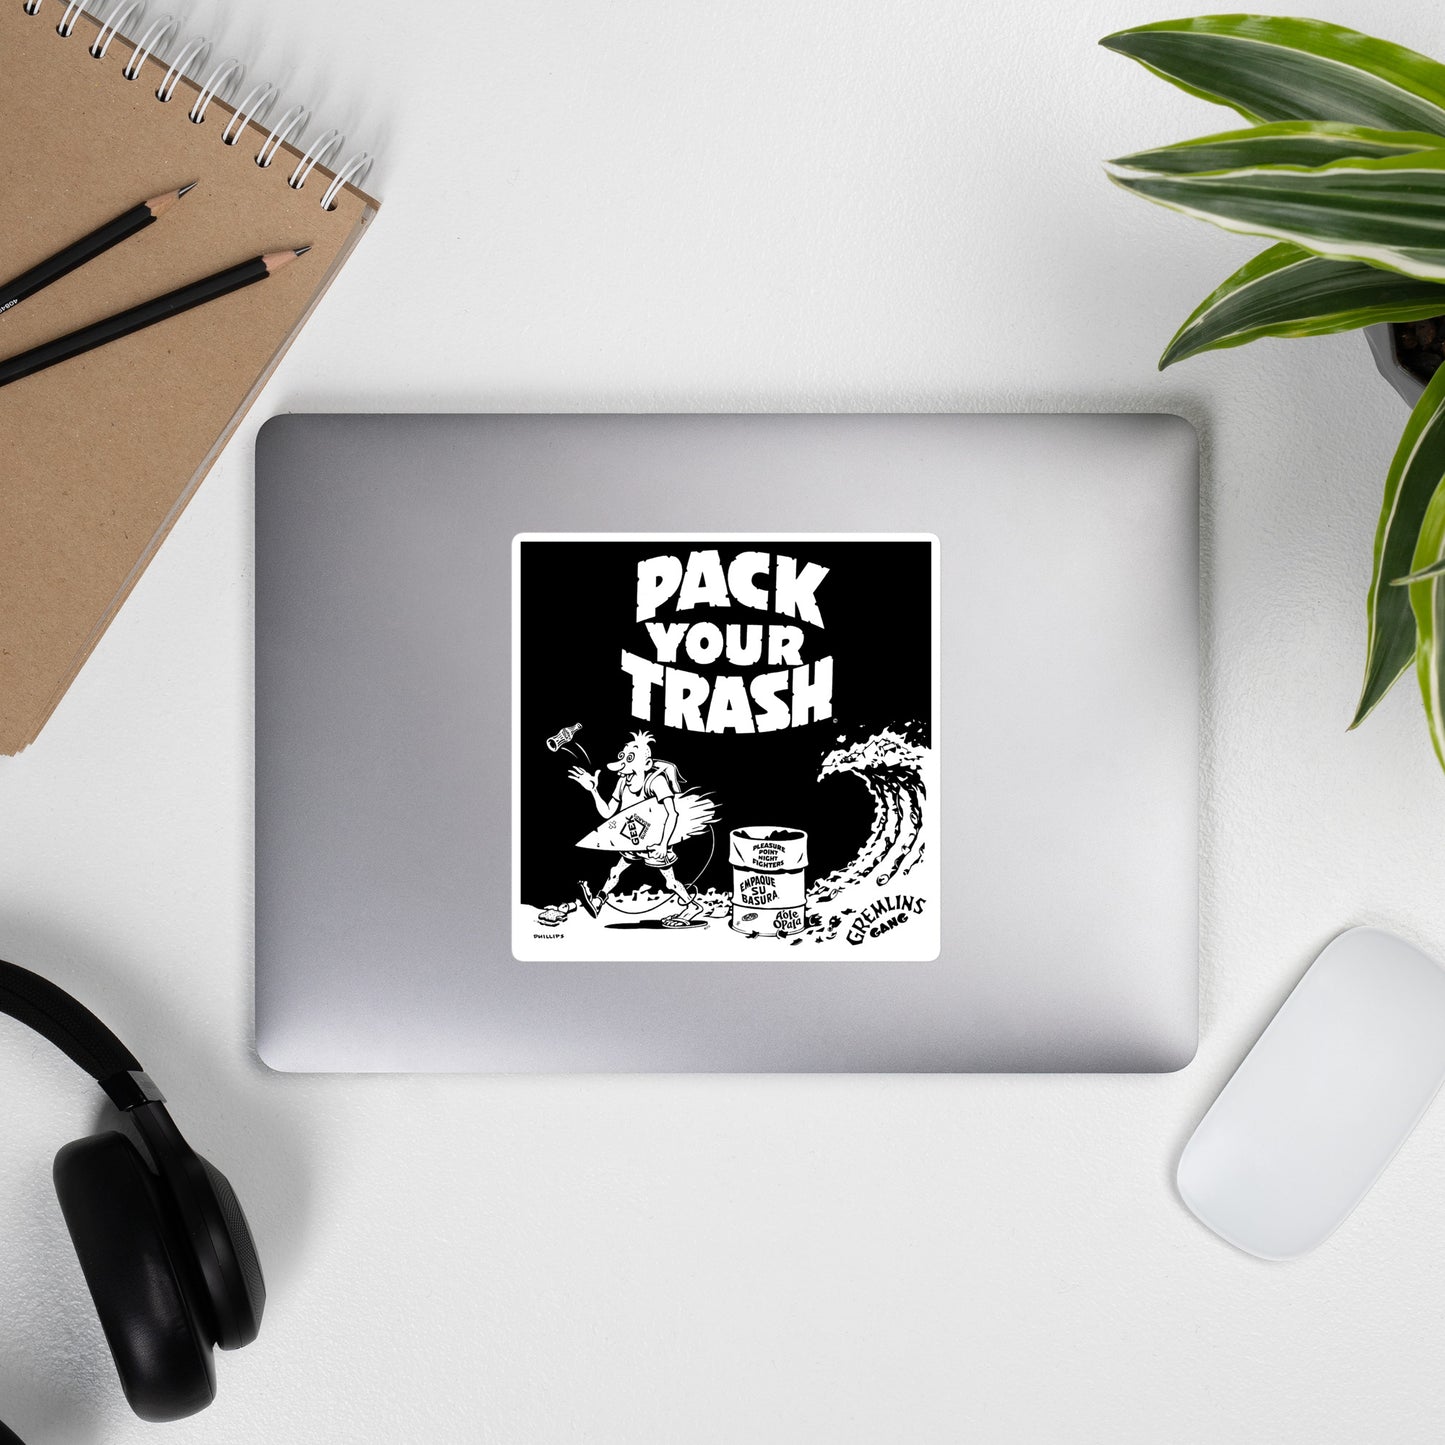 Pack Your Trash - Surf Geek - SquareBubble-free stickers